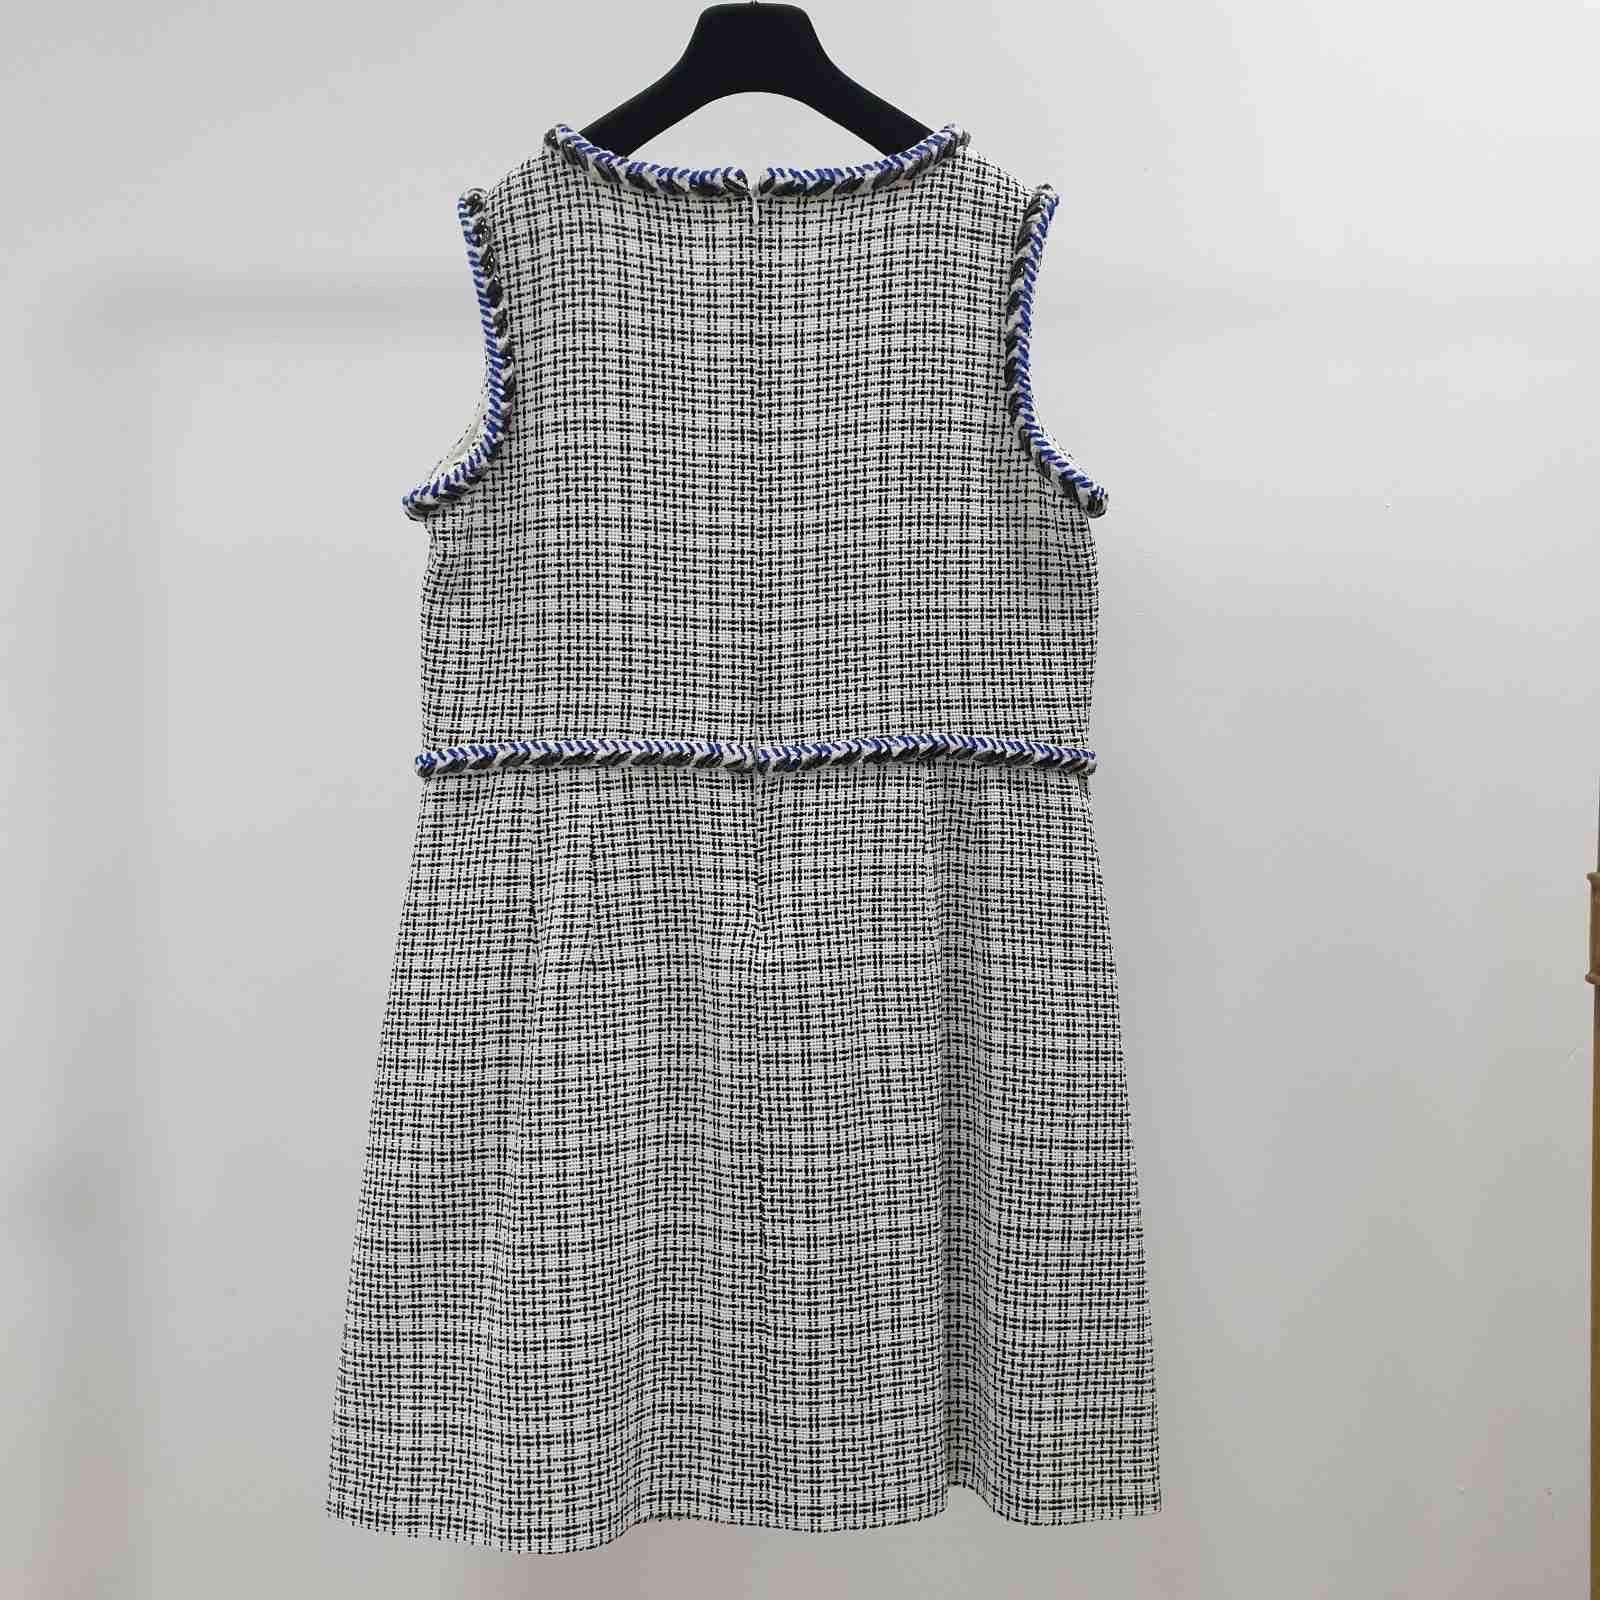 PRE-SPRING 2017 CHANEL SLEEVELESS TWEED DRESS
 Classic tweed sleeveless shift dress in black, blue and white colors.
- Metallic chevron pattern trim throughout.
- Crew neck with split detail.
- Silver CC button at waist.
- Concealed zipper closure